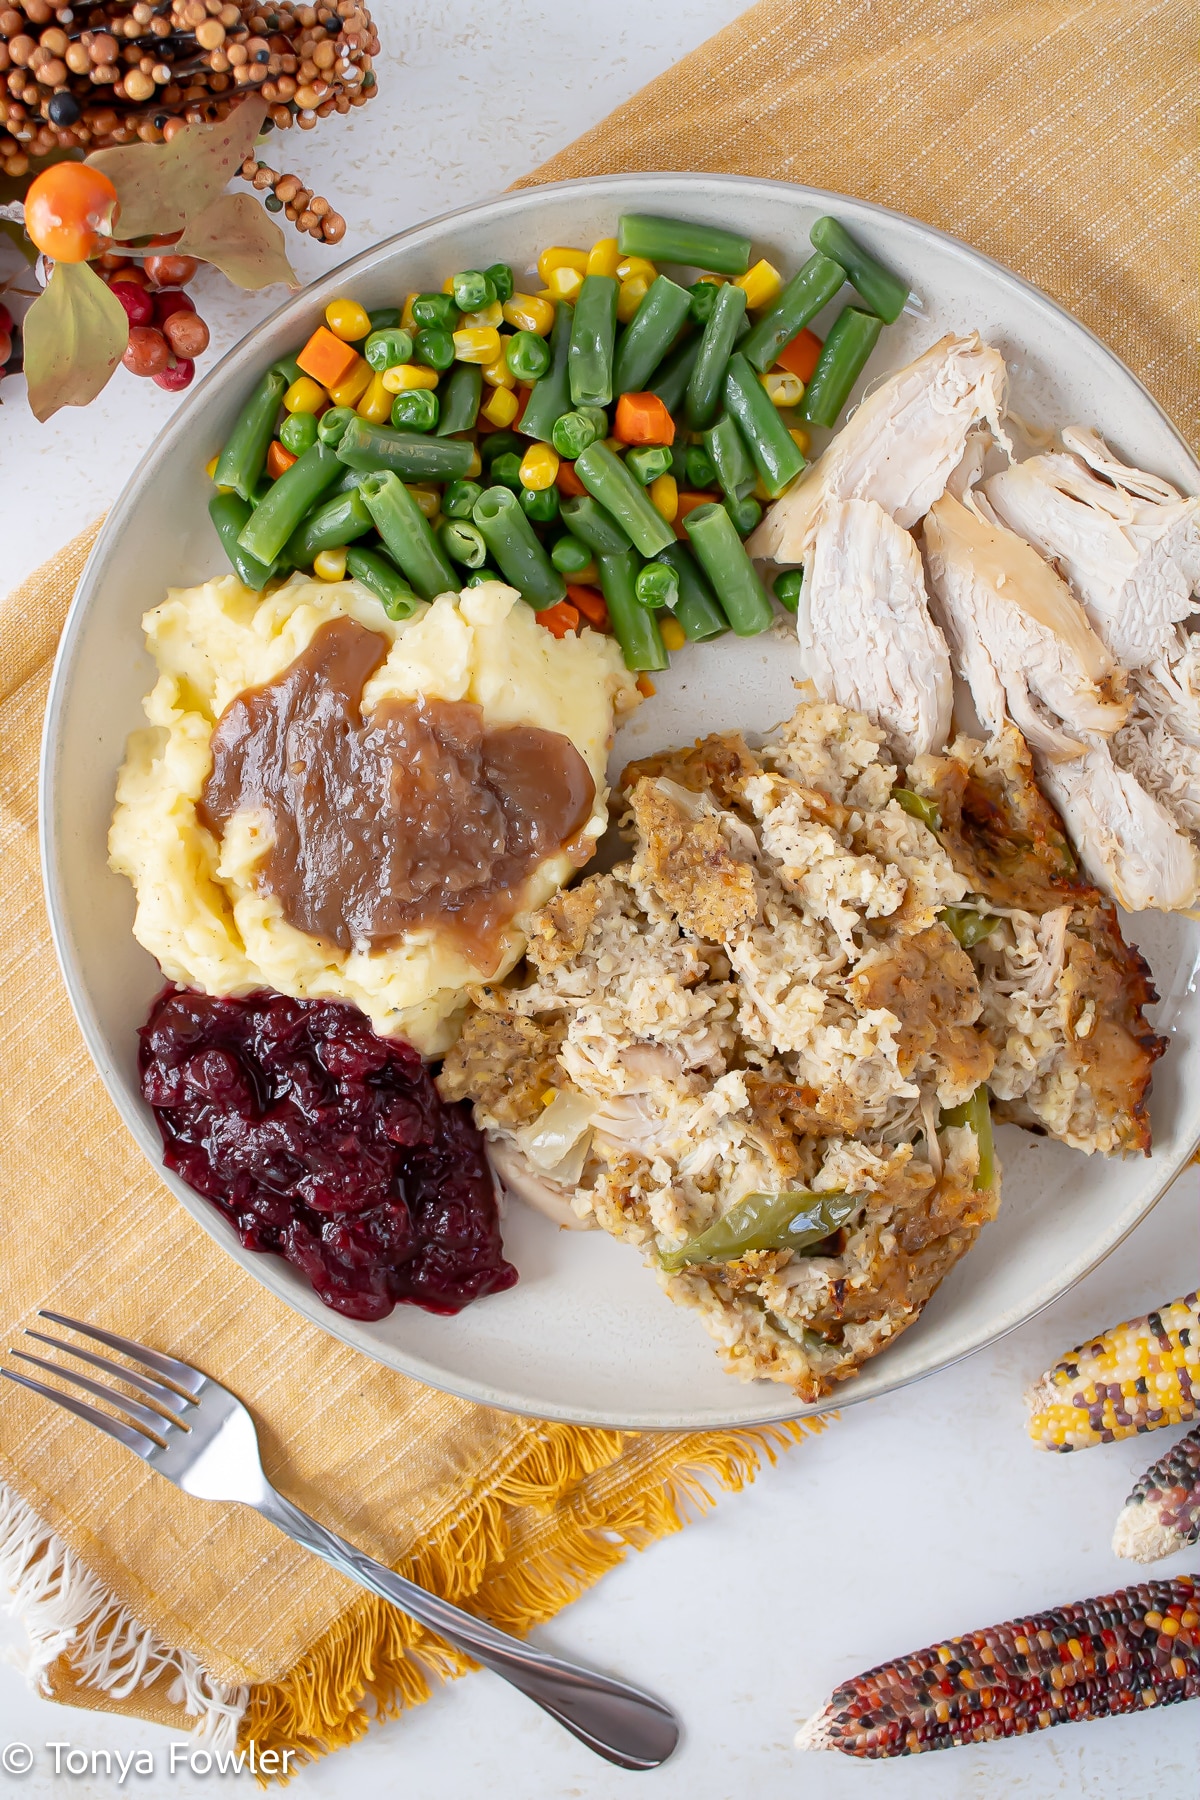 Overhead image of Thanksgiving plate.